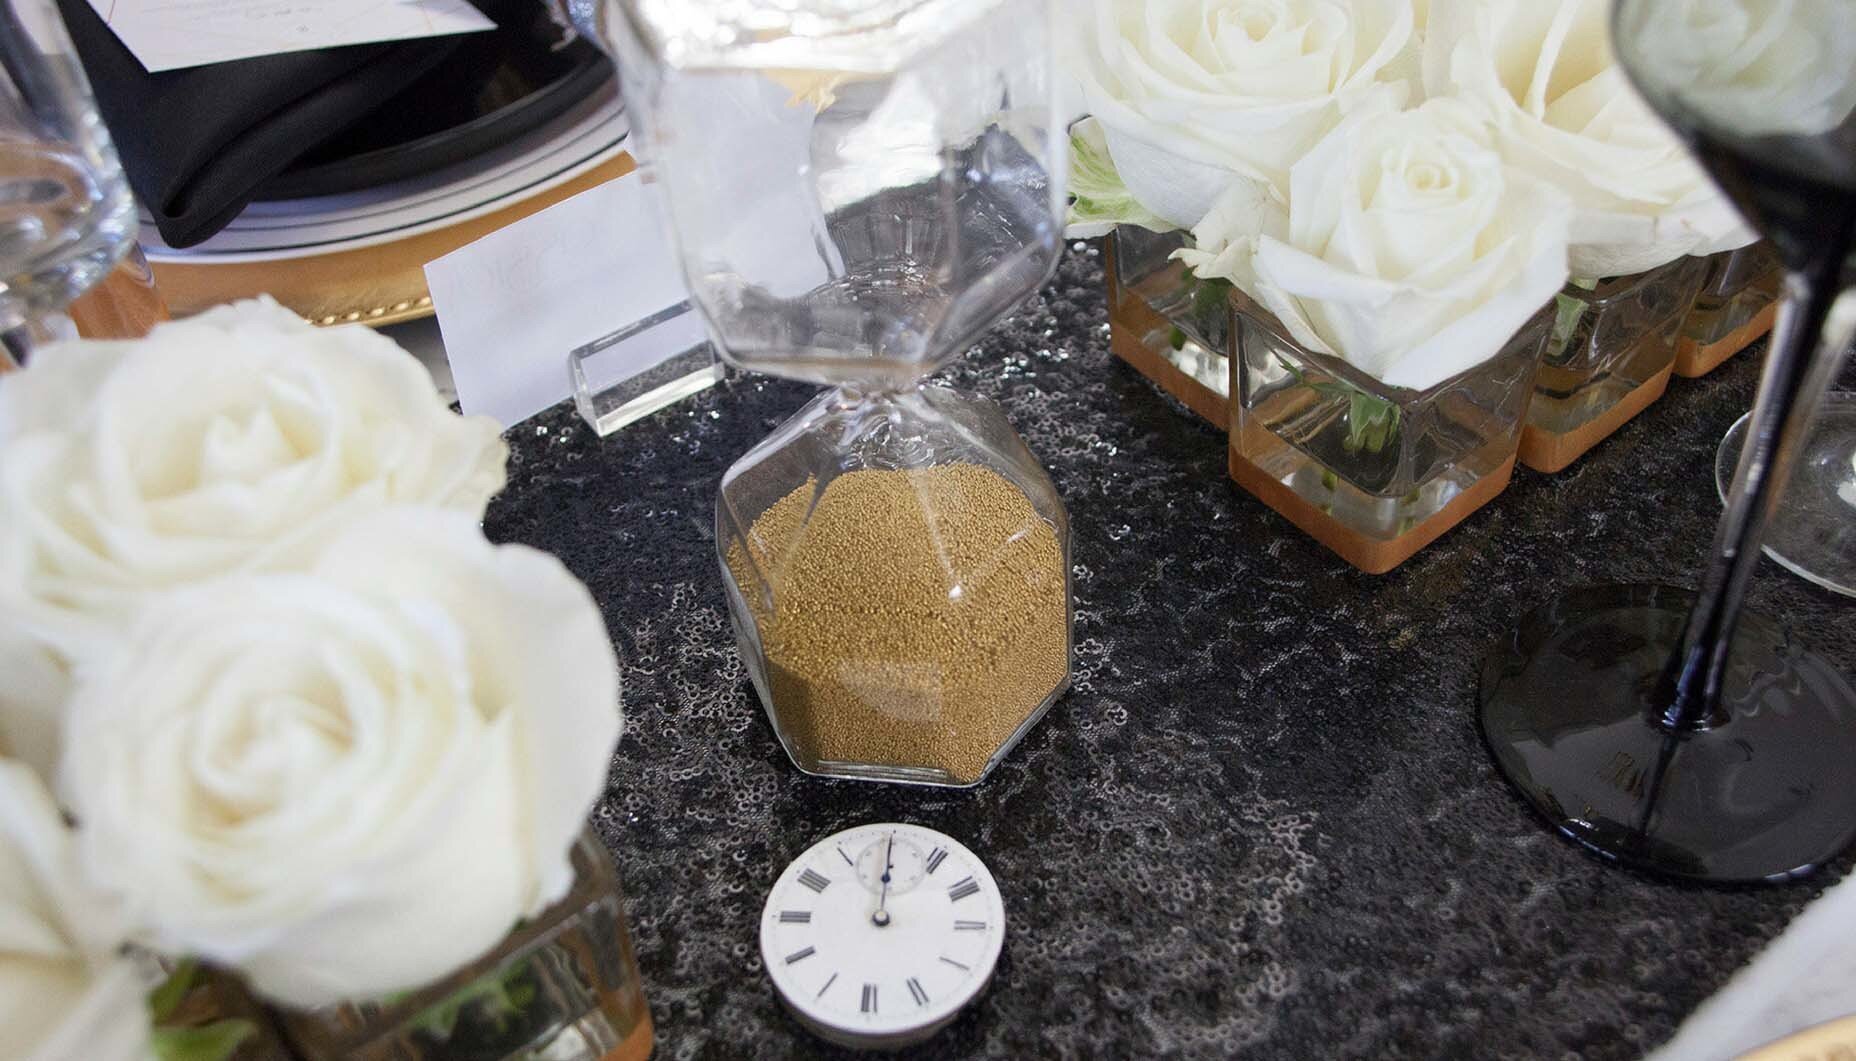 Mixed metallic NYE party inspiration - Vintage Time Pieces - Get more New Year’s Eve decor ideas now at minteventdesign.com!